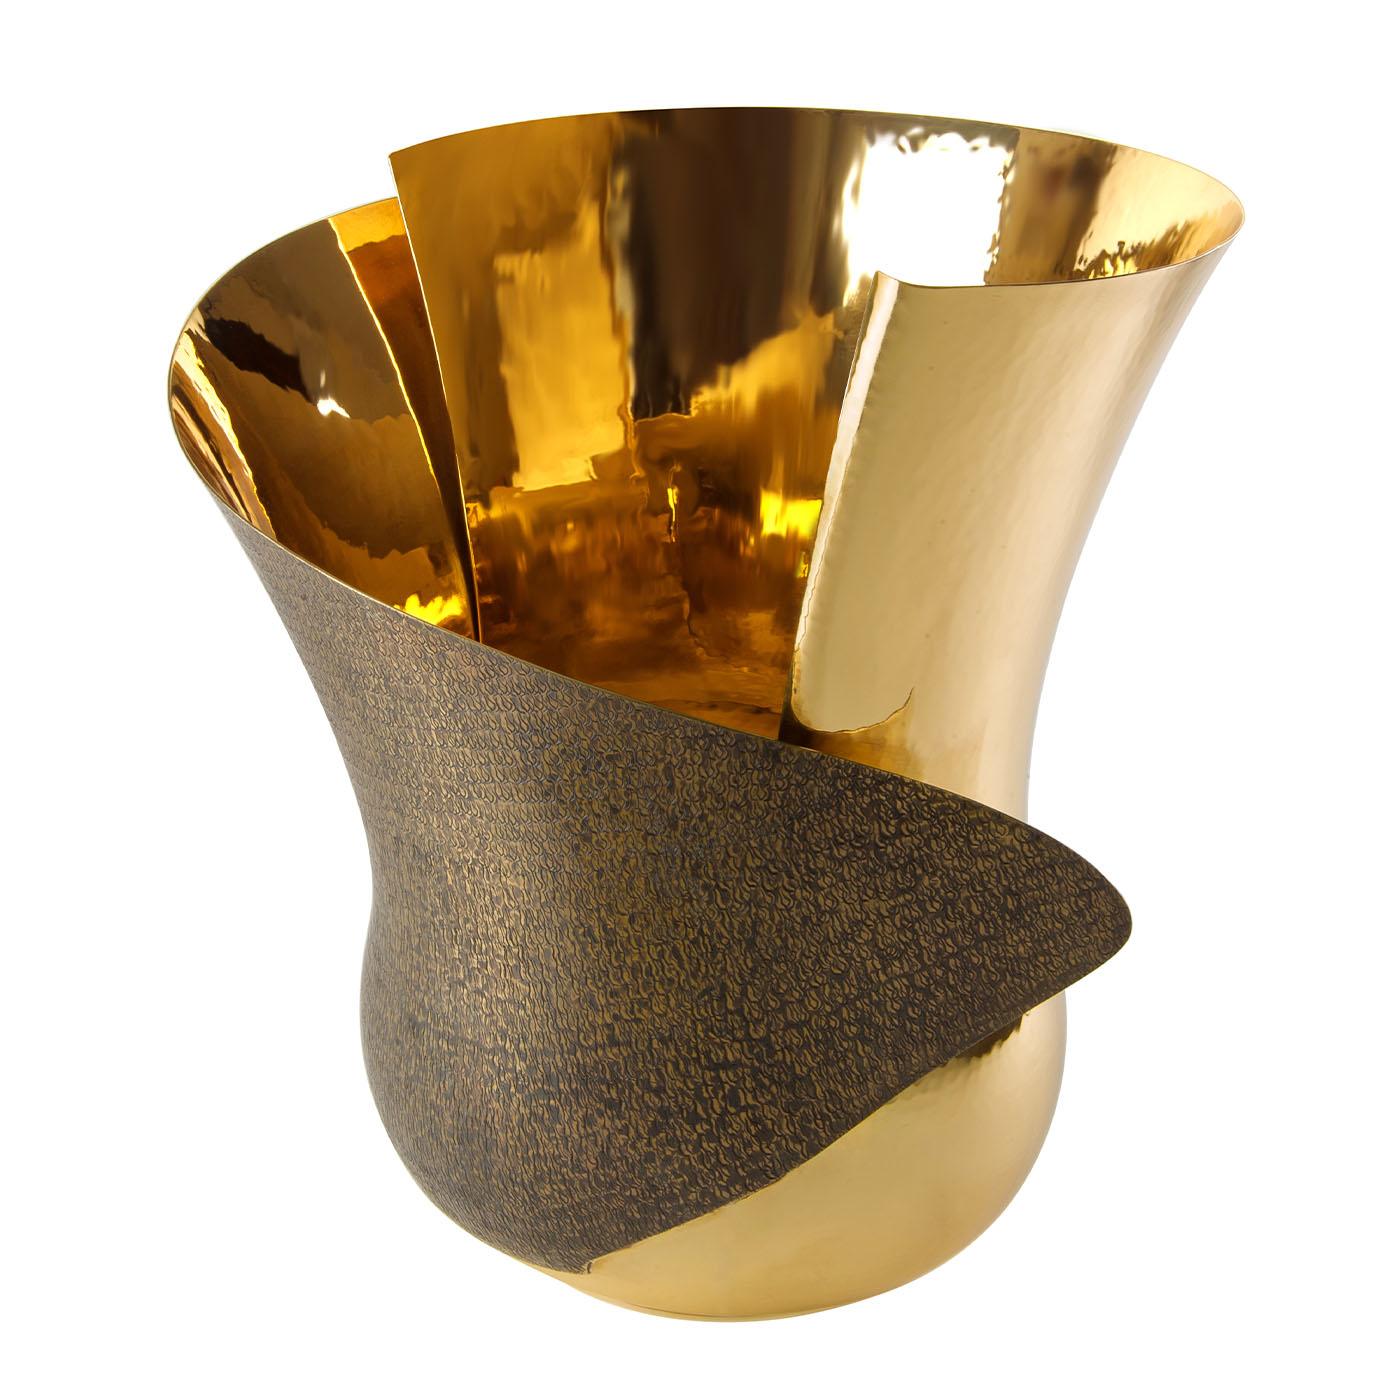 Inspired by a blossoming flower bud, this poetic and stunning brass vase is a collaboration with Riccardo Erata. A masterful hammering process is behind its luminous petals that, with their folding and bending design, deliver an intriguing sense of